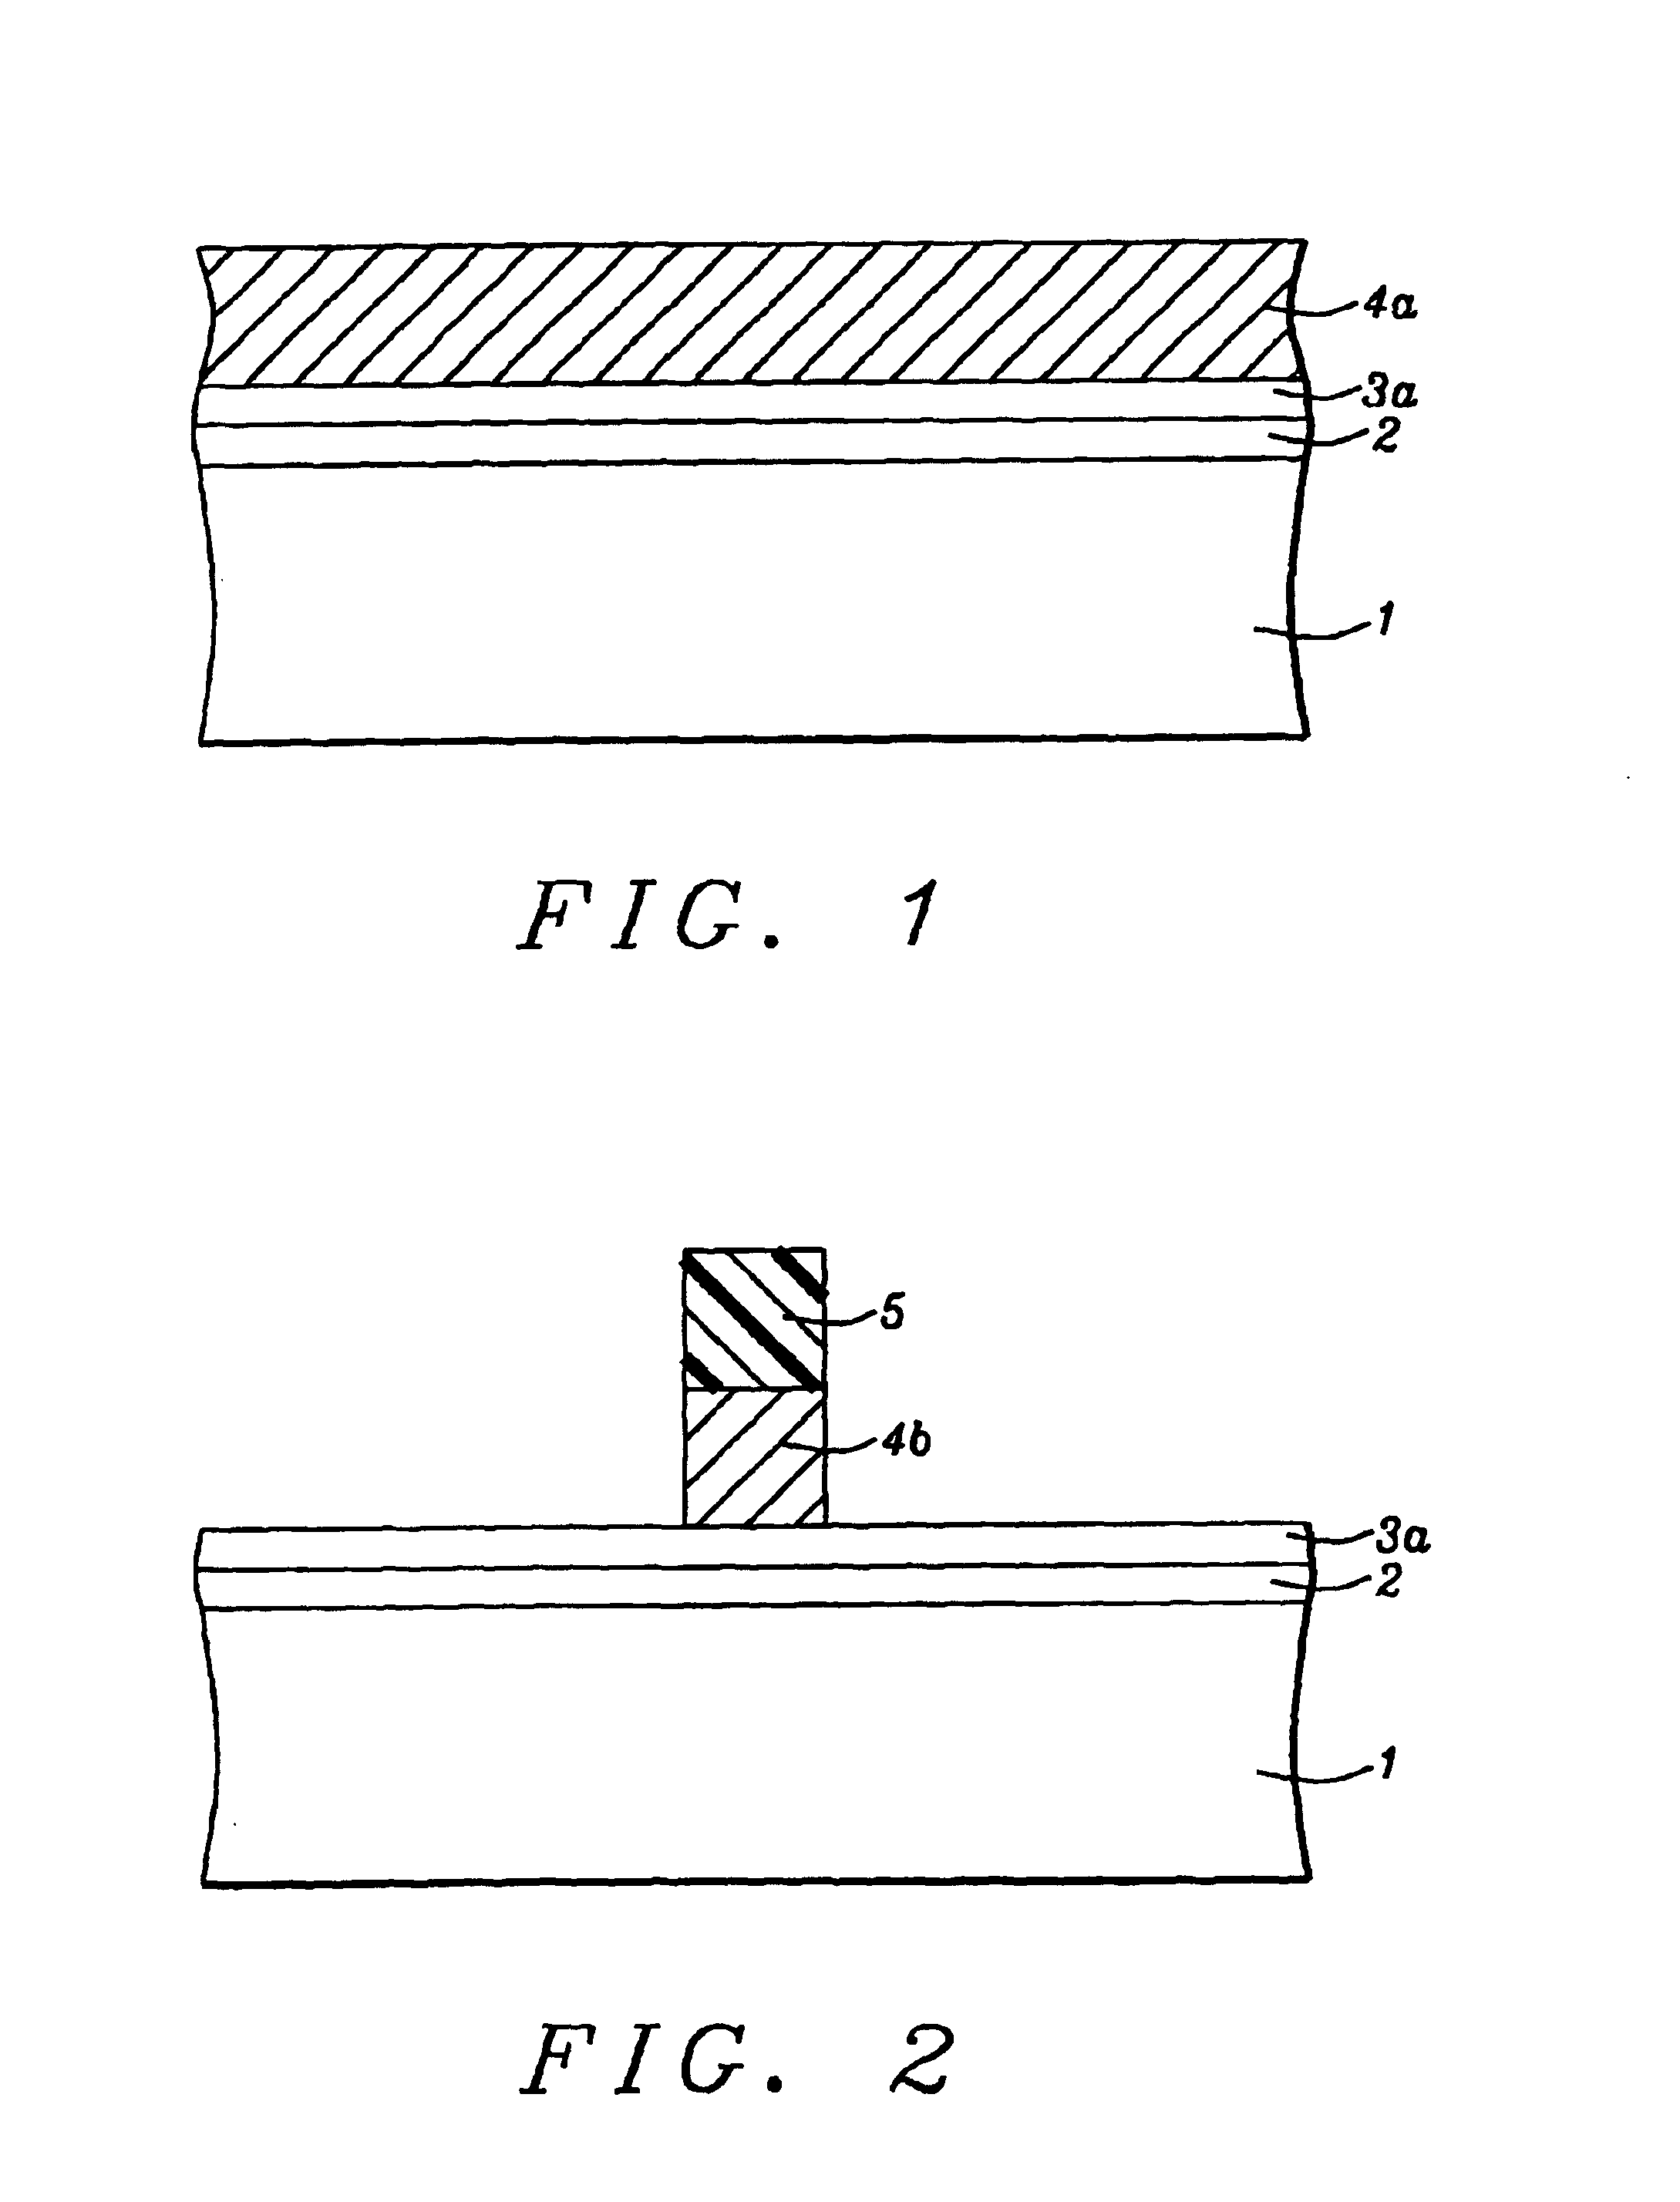 Method of fabricating a MOSFET device with metal containing gate structures